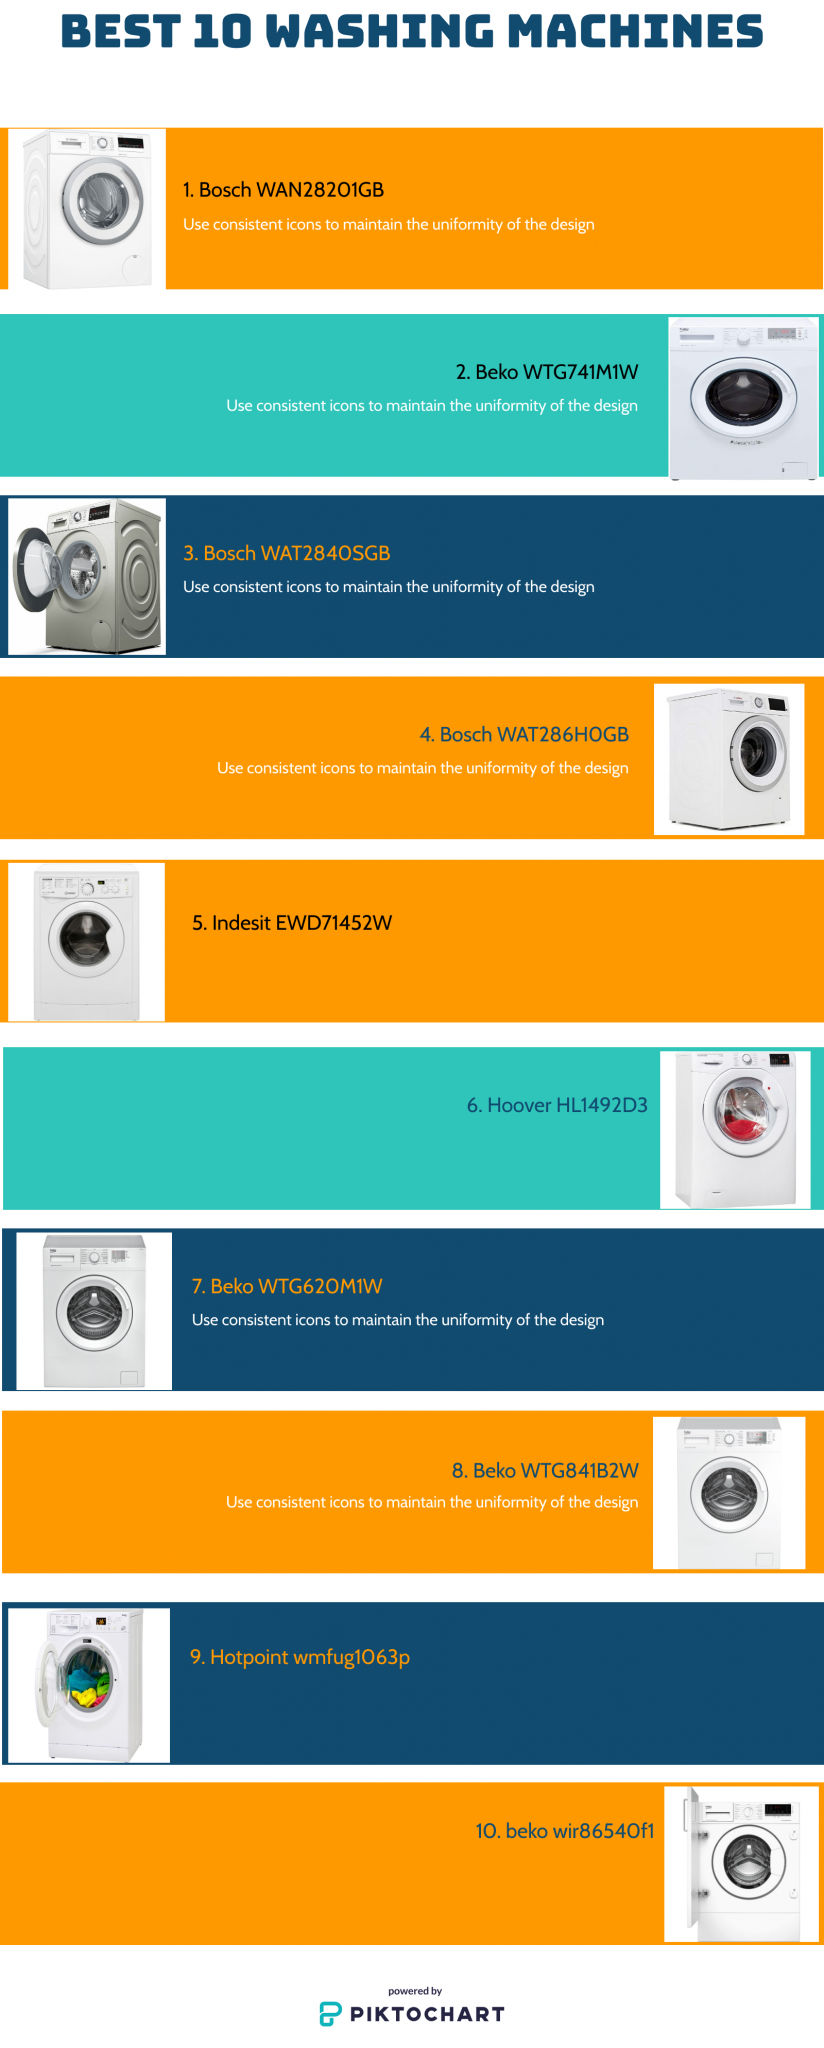 Best 10 Washing Machines in 2020 Complete Buying Guide